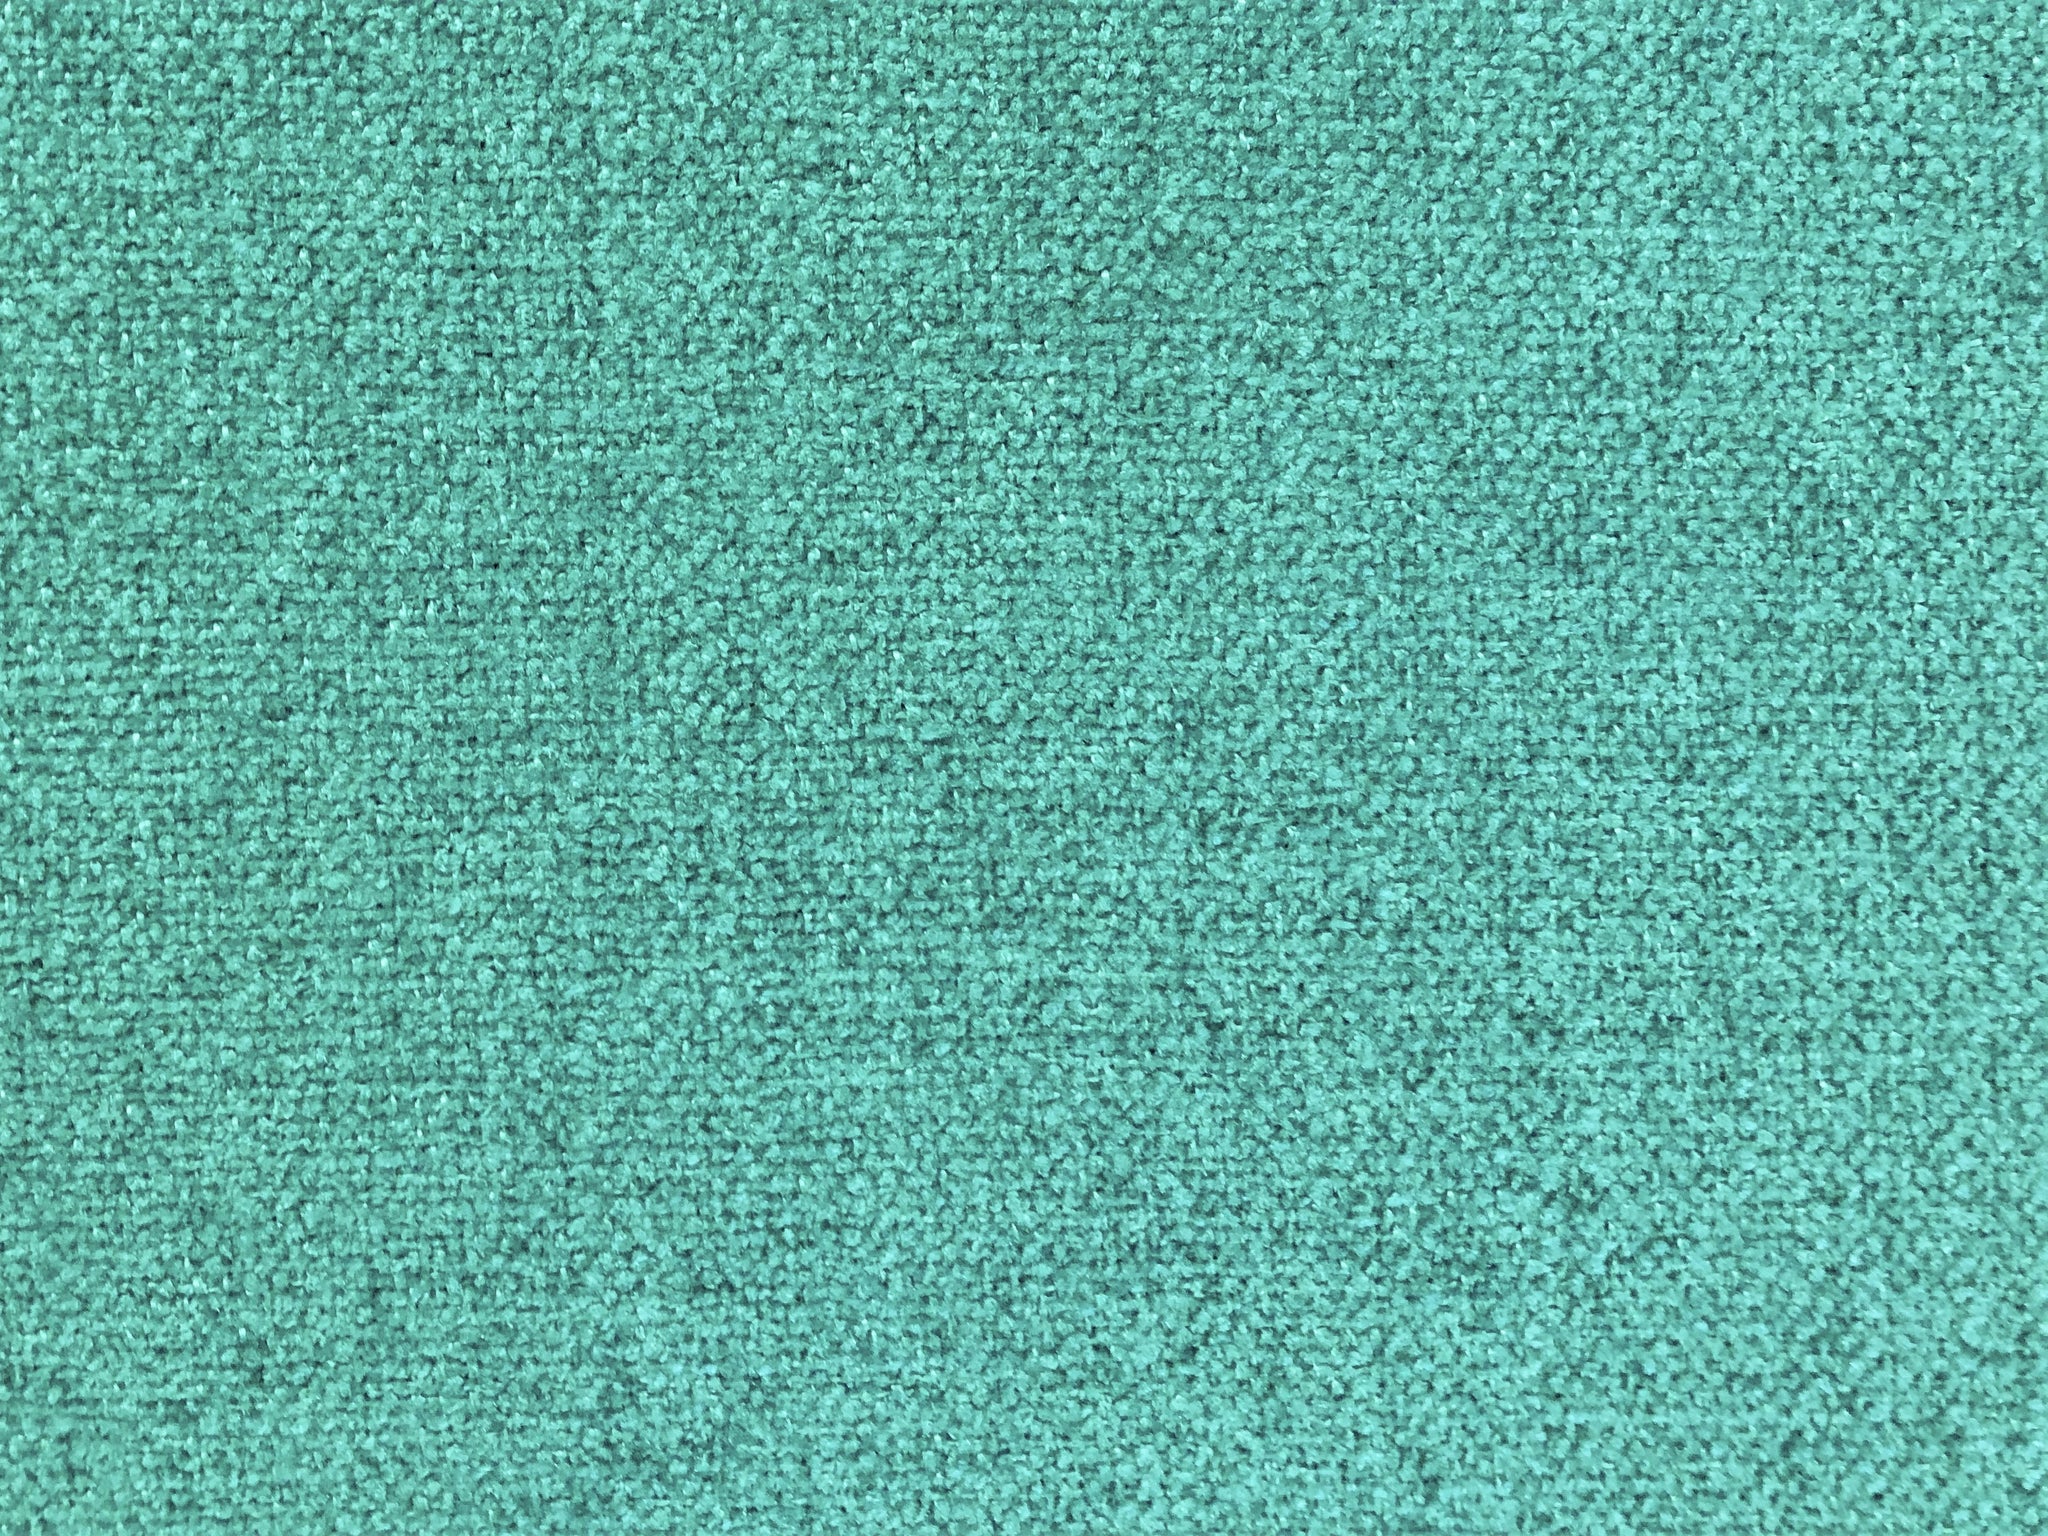 Boho Lagoon Aqua Teal Chenille Upholstery Fabric By The Yard – Affordable  Home Fabrics